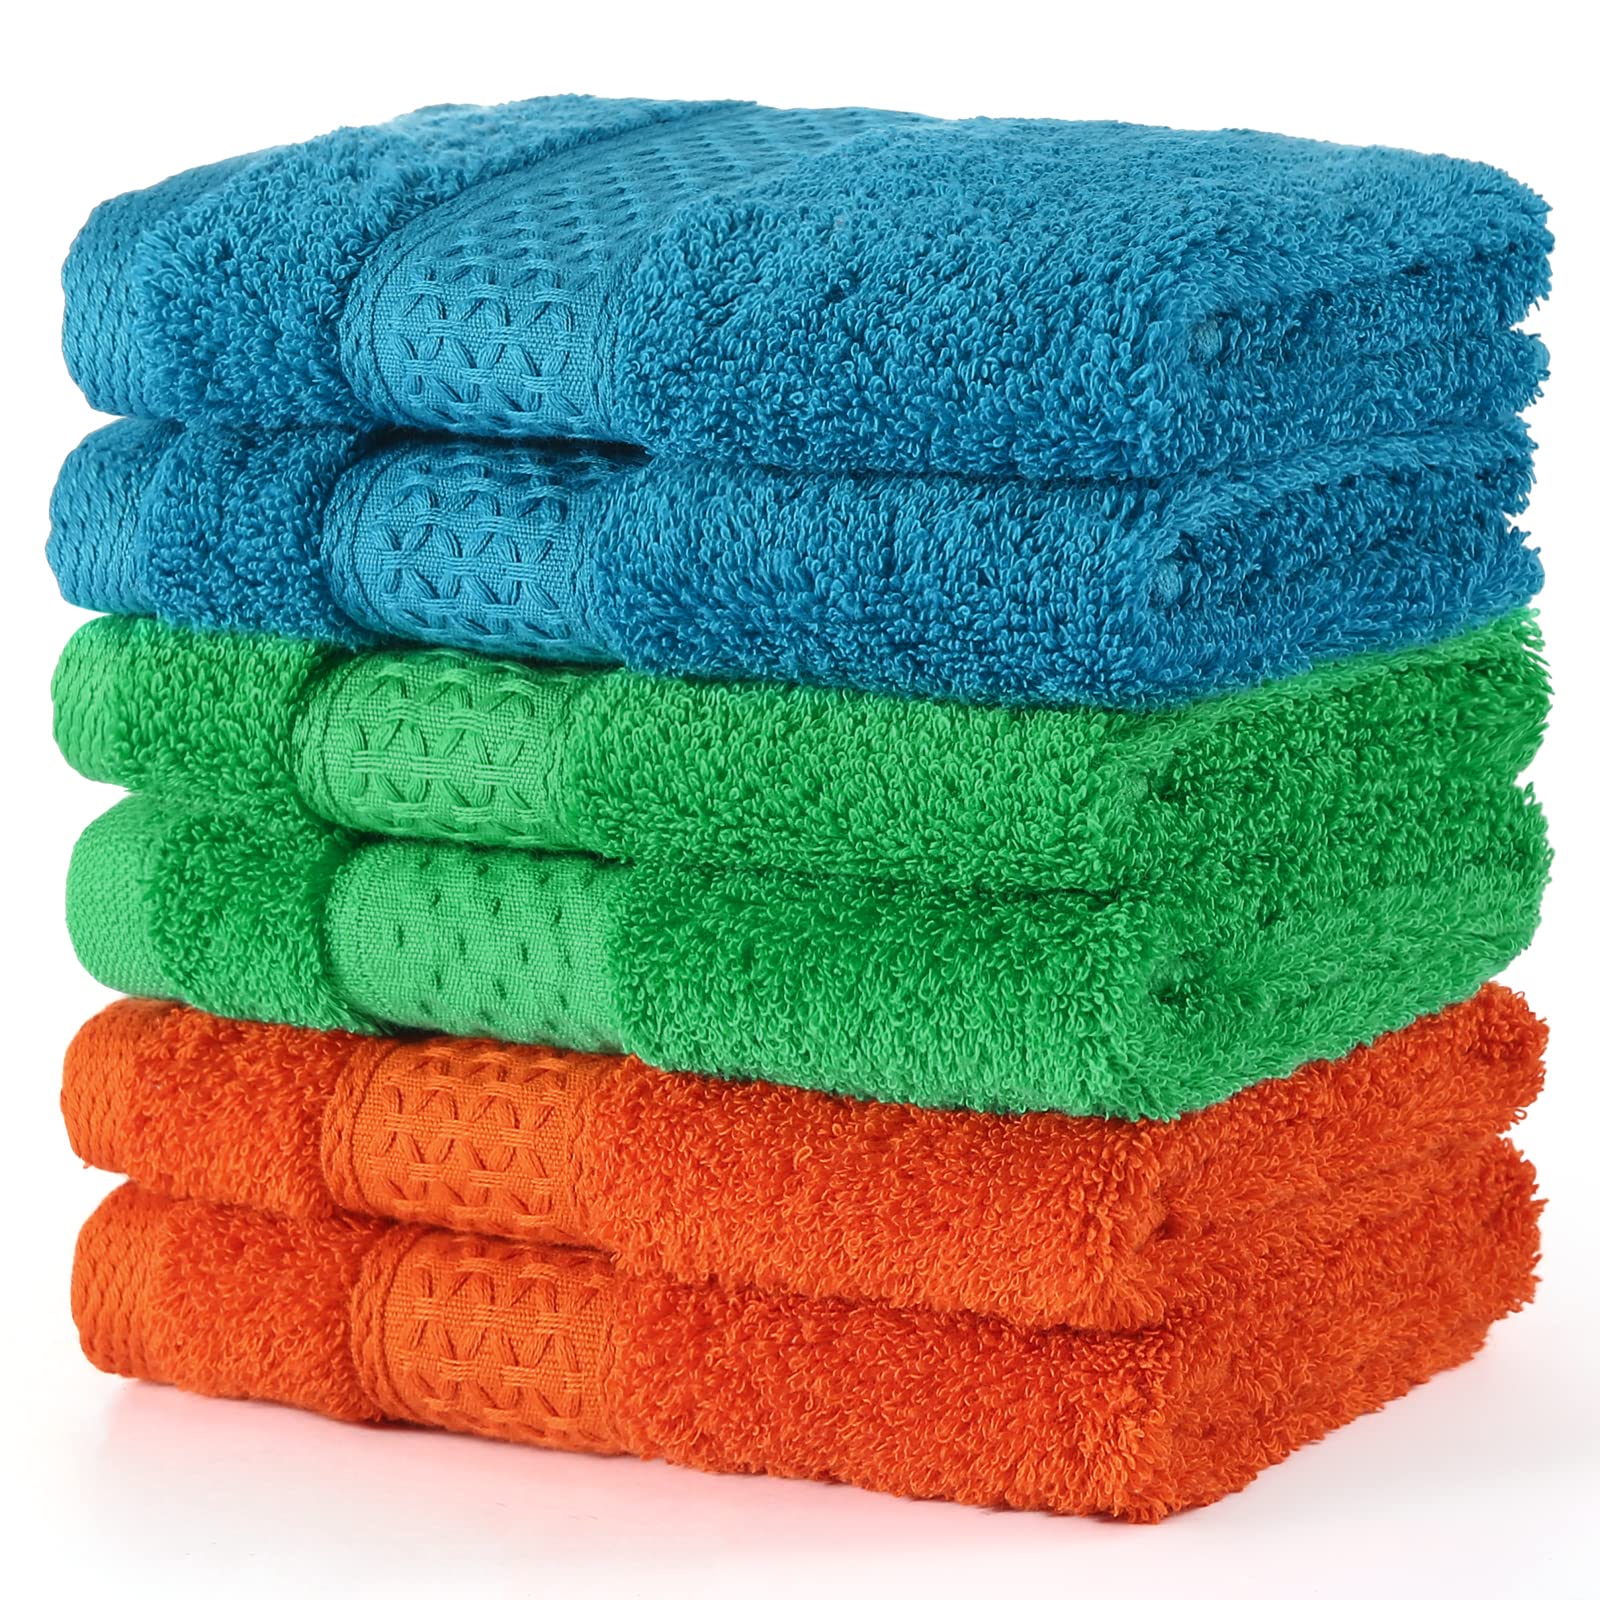 Chiicol Cotton Wash Cloths Absorbent Bath Washcloths for Body and